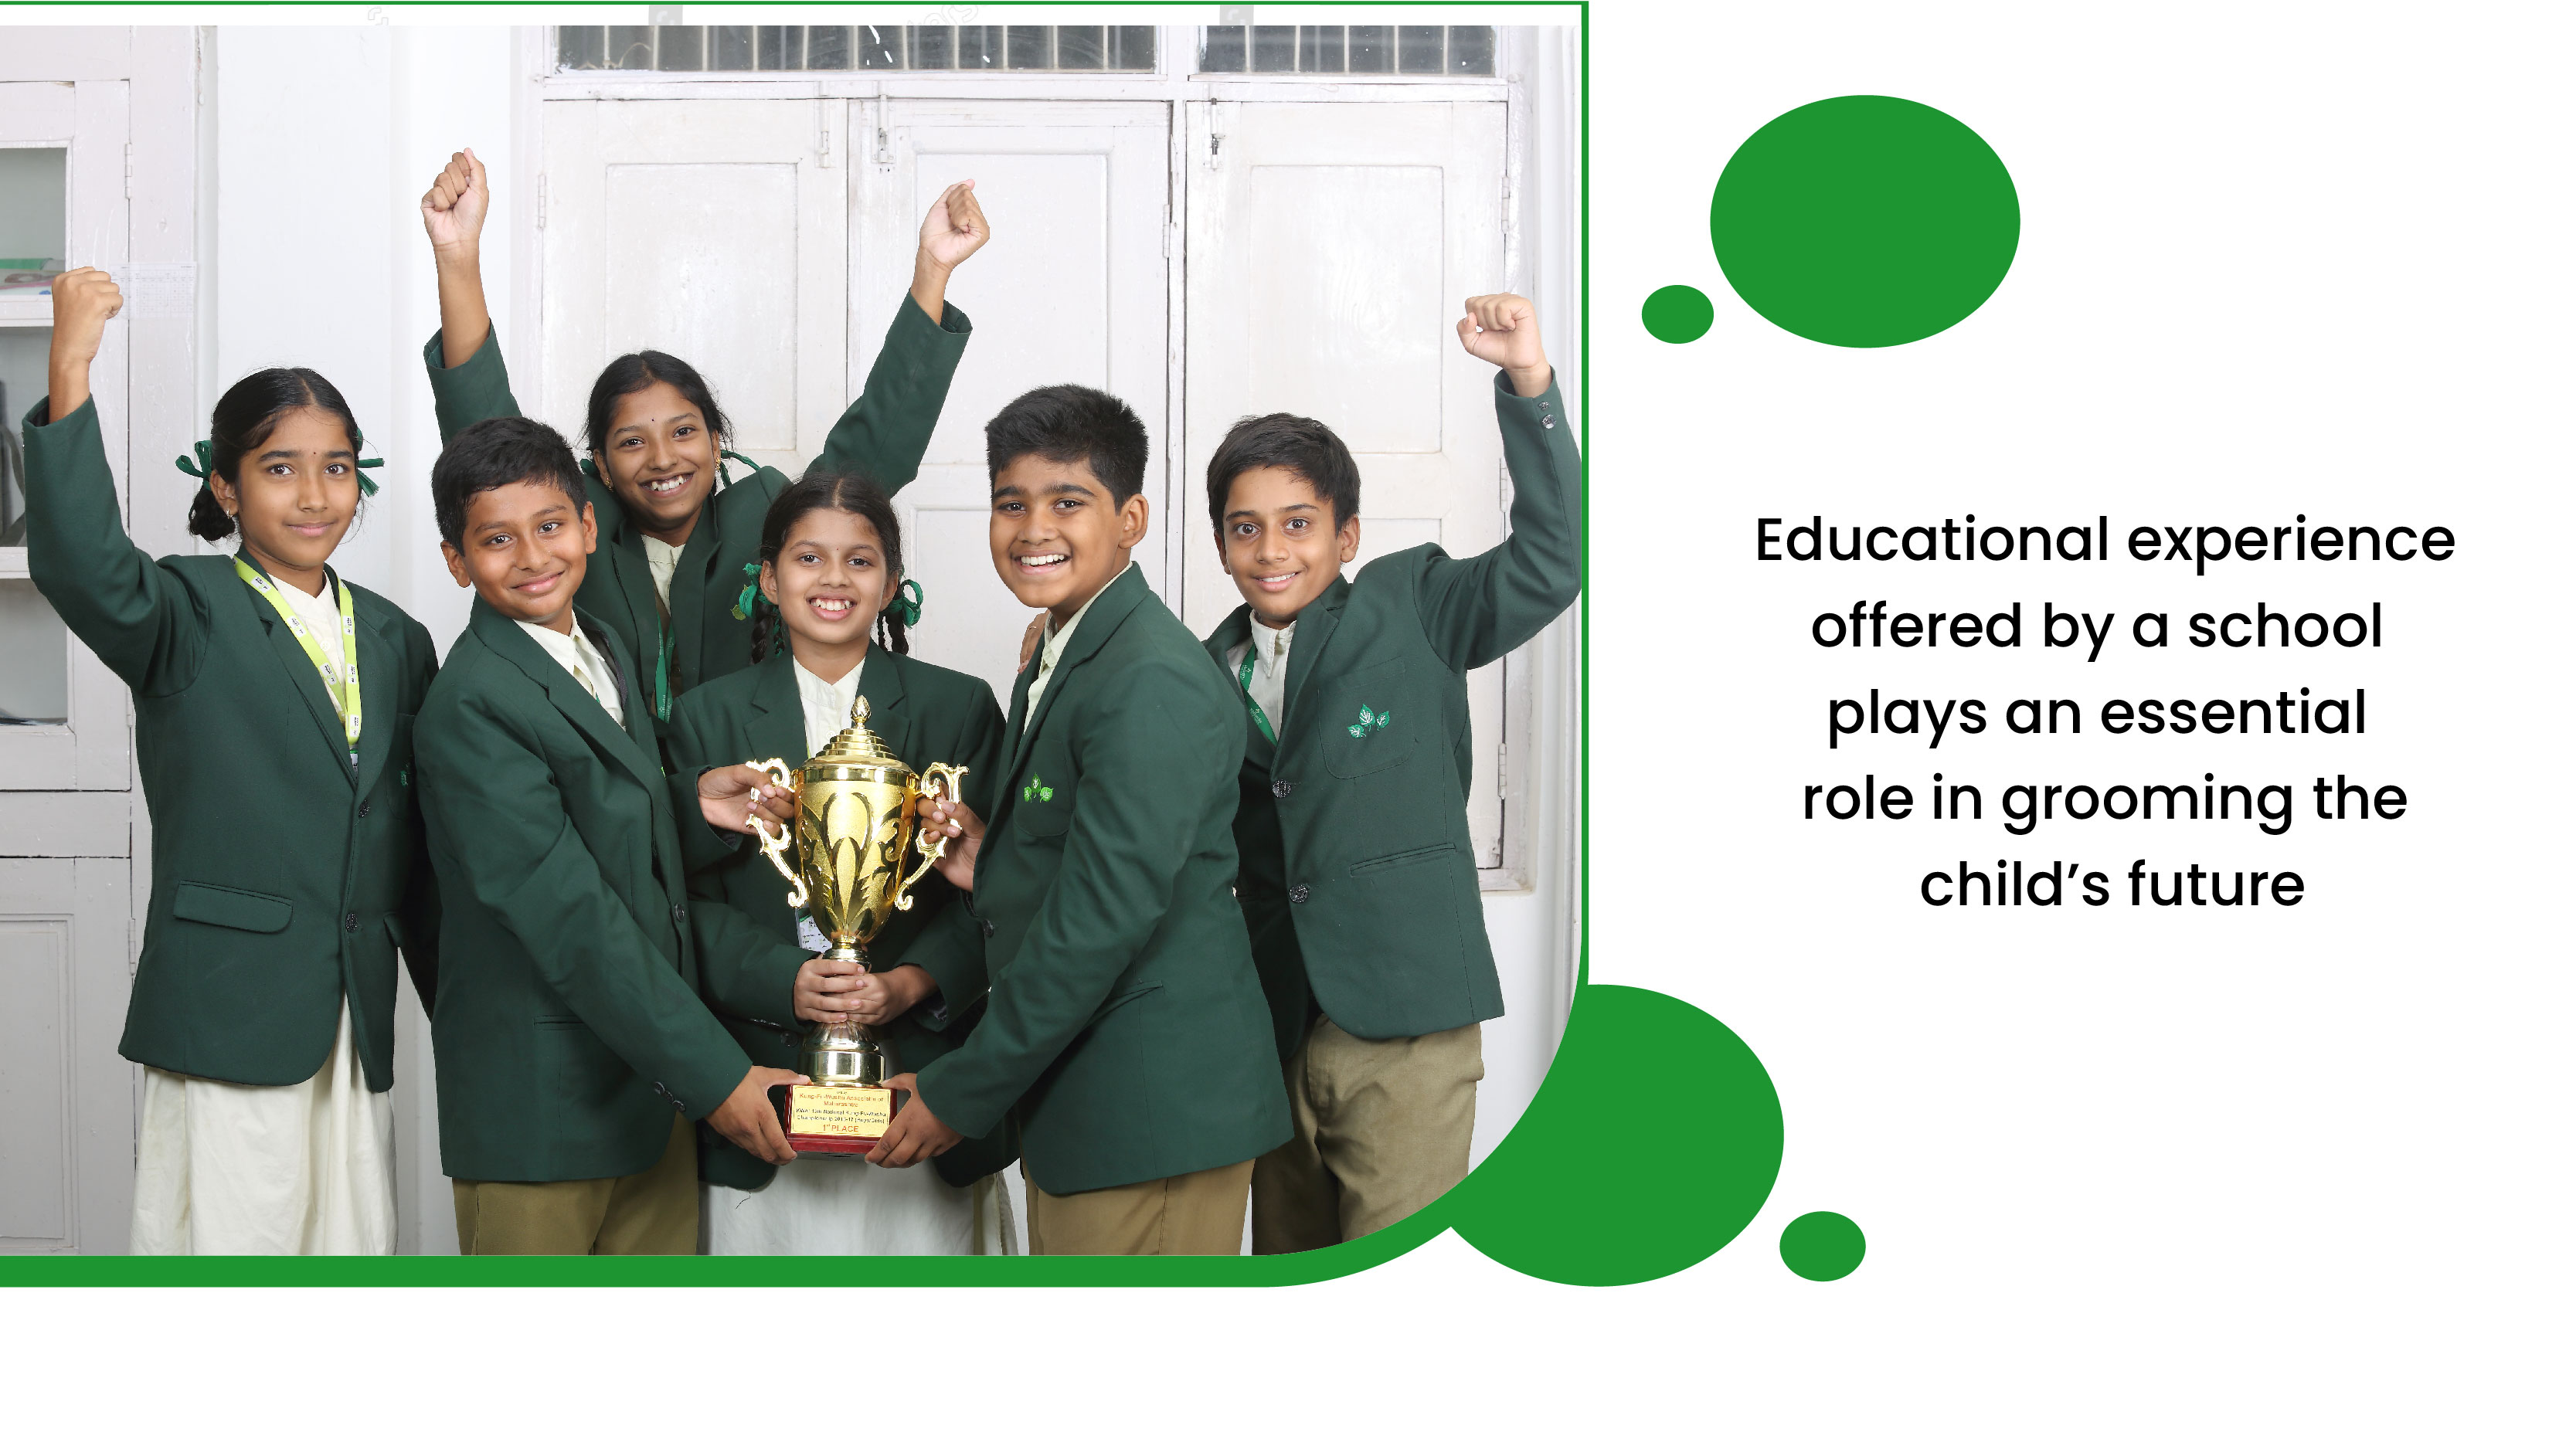 Educational experience offered by a school plays an essential role in grooming the child’s future